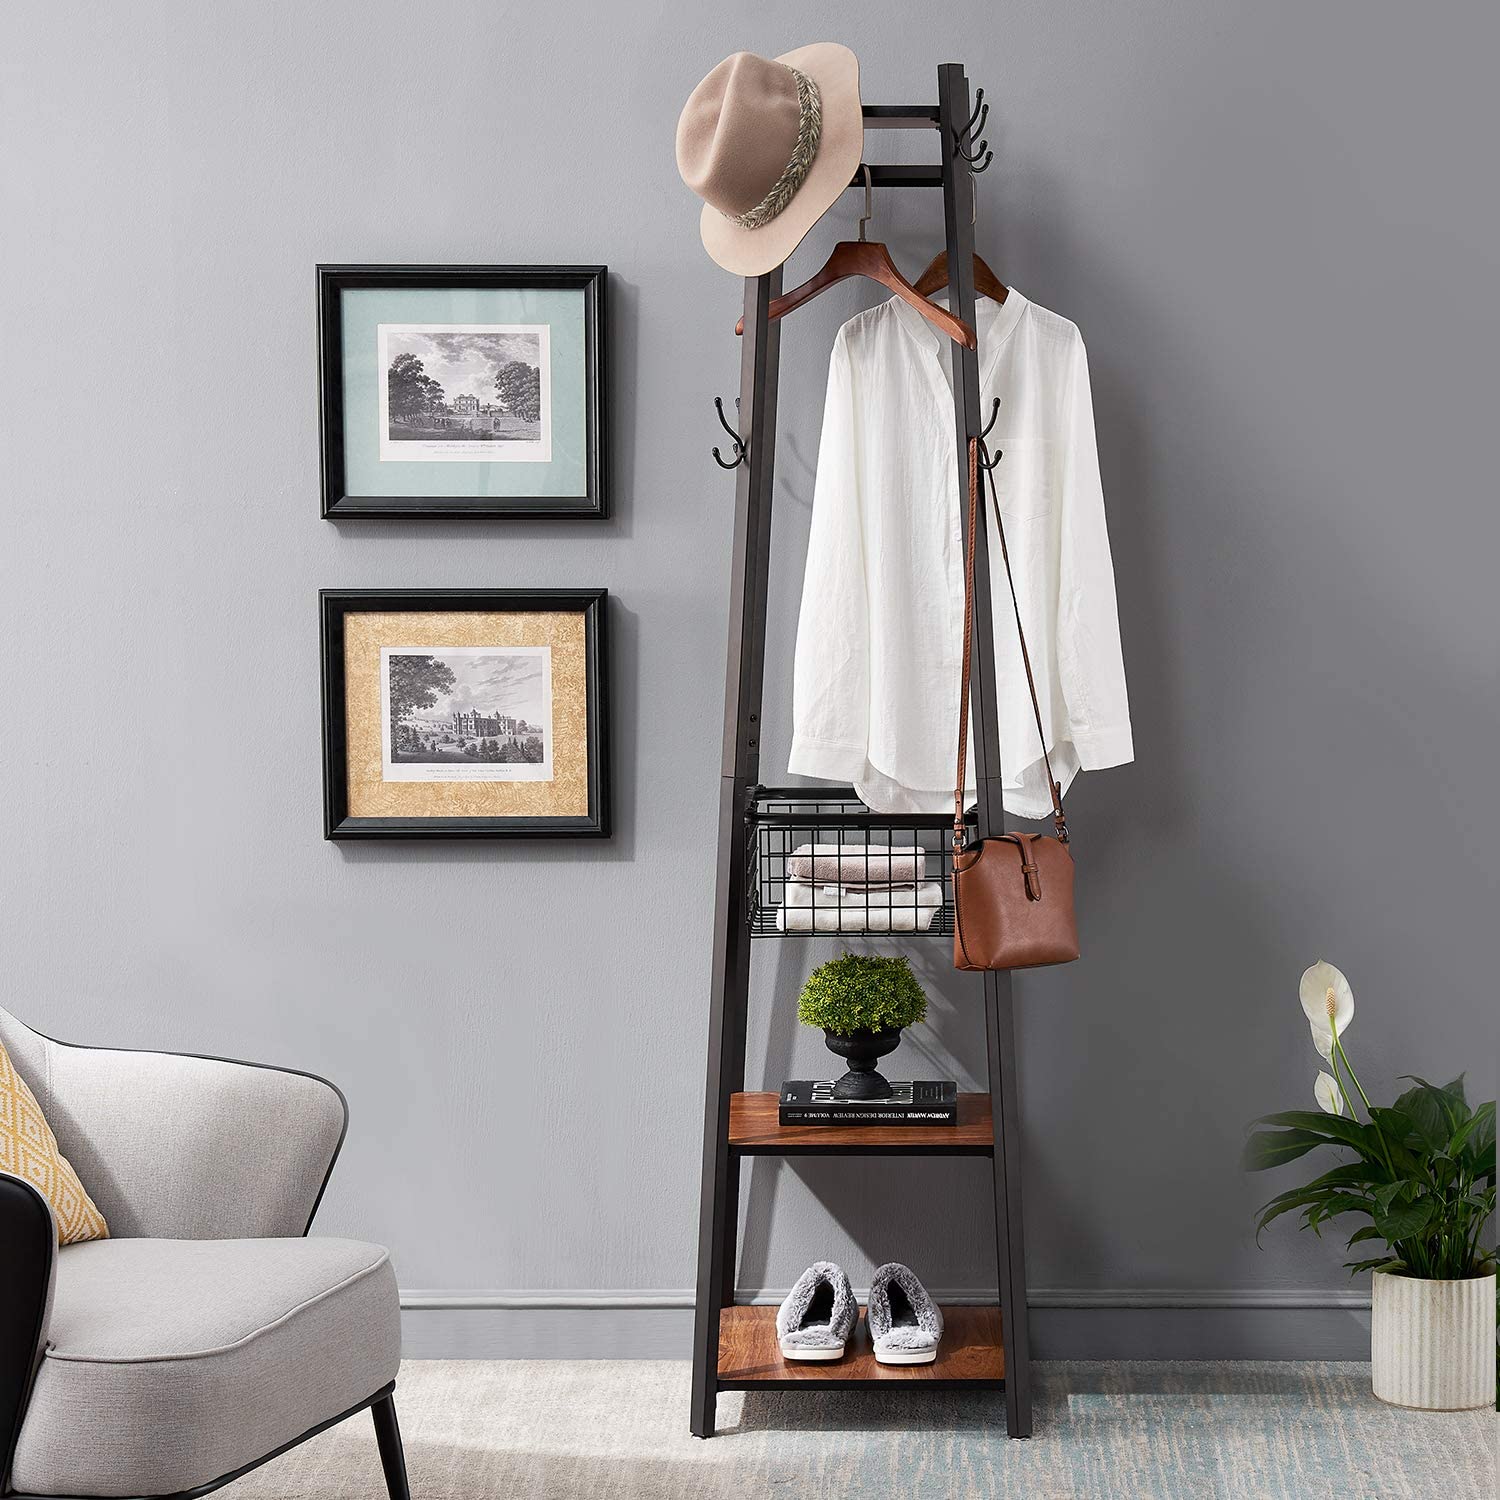 Industrial Coat Rack Enterway Clothes Stand with 2 Tier Storage  Shelves/Basket,Hall Trees with 8 Dual Hooks, Brown+Black